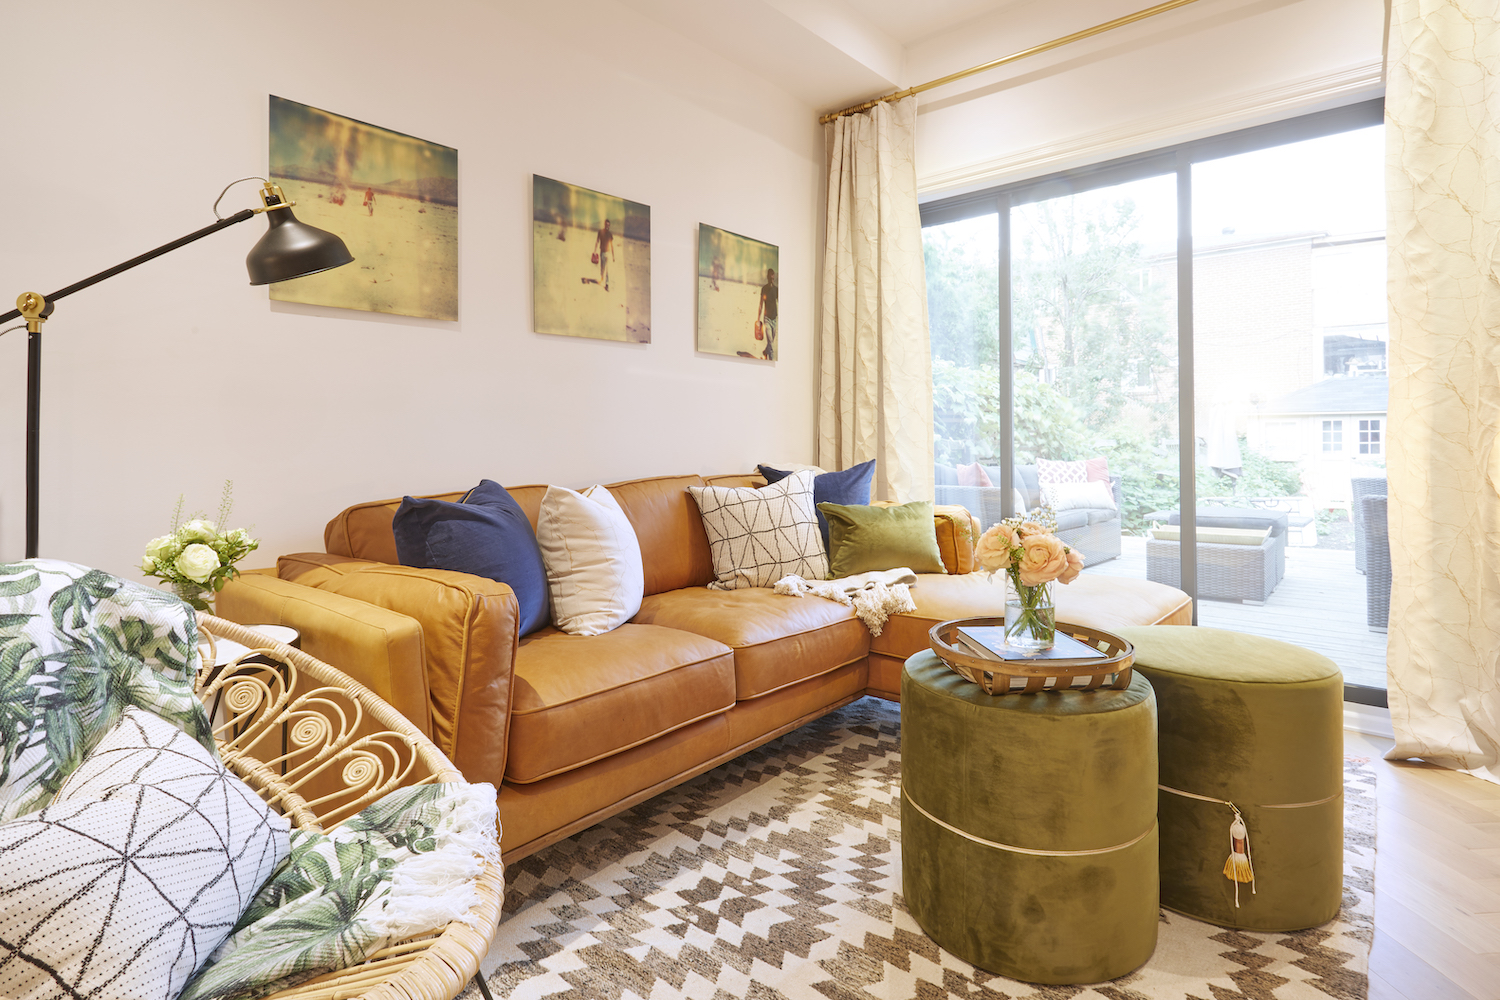 A modern bohemian living room with an orange leather couch, green ottoman stools and a patterned rug